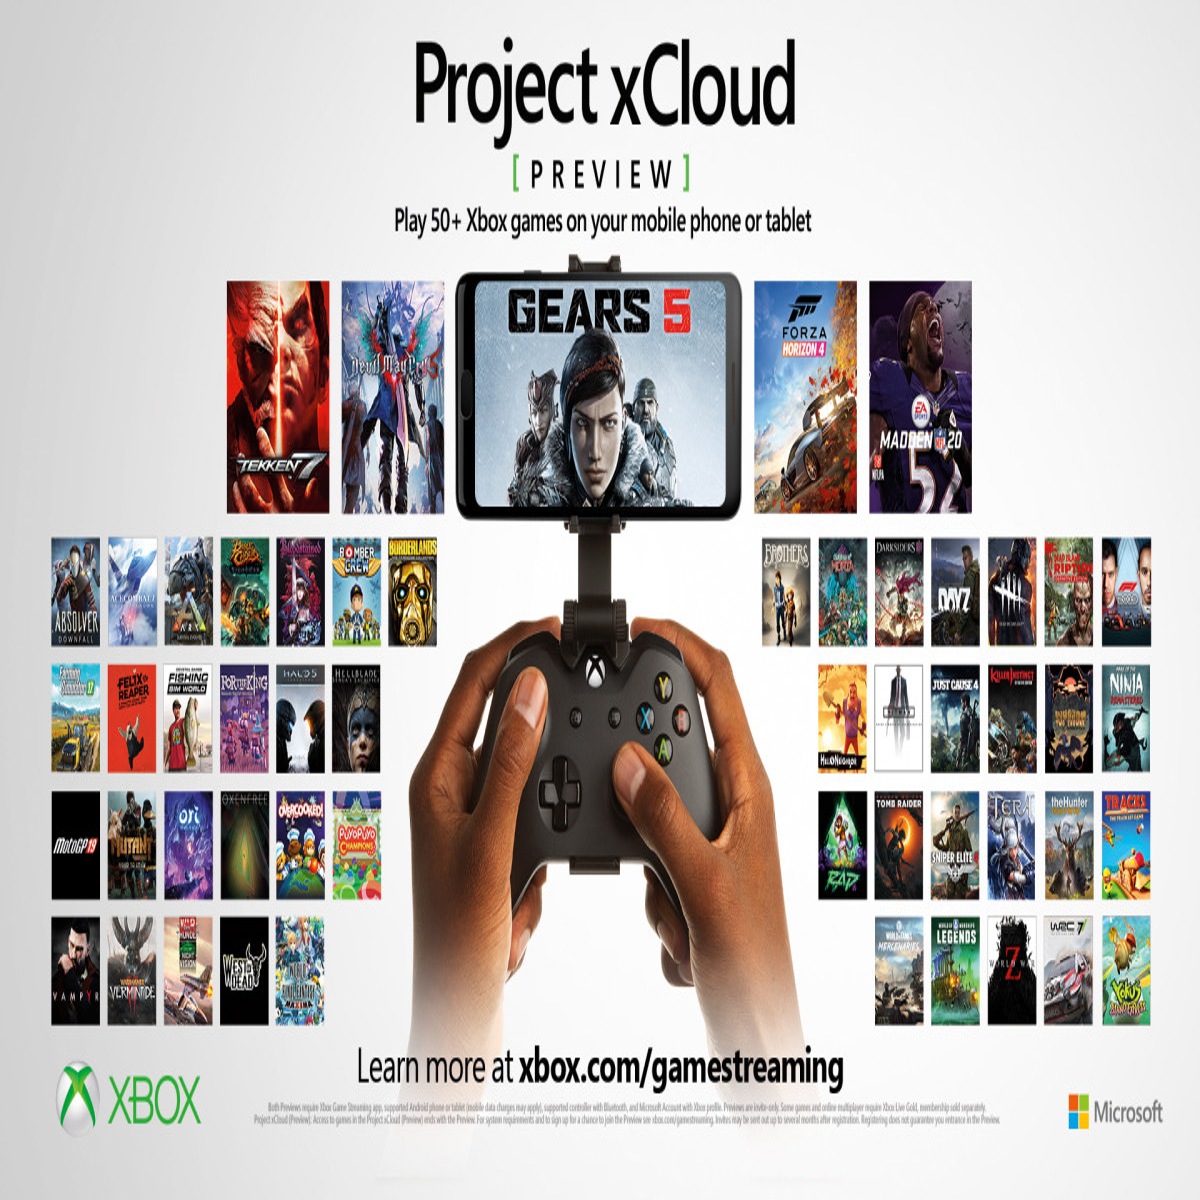 Grand theft auto 5 (Xbox cloud gaming) : r/xcloud